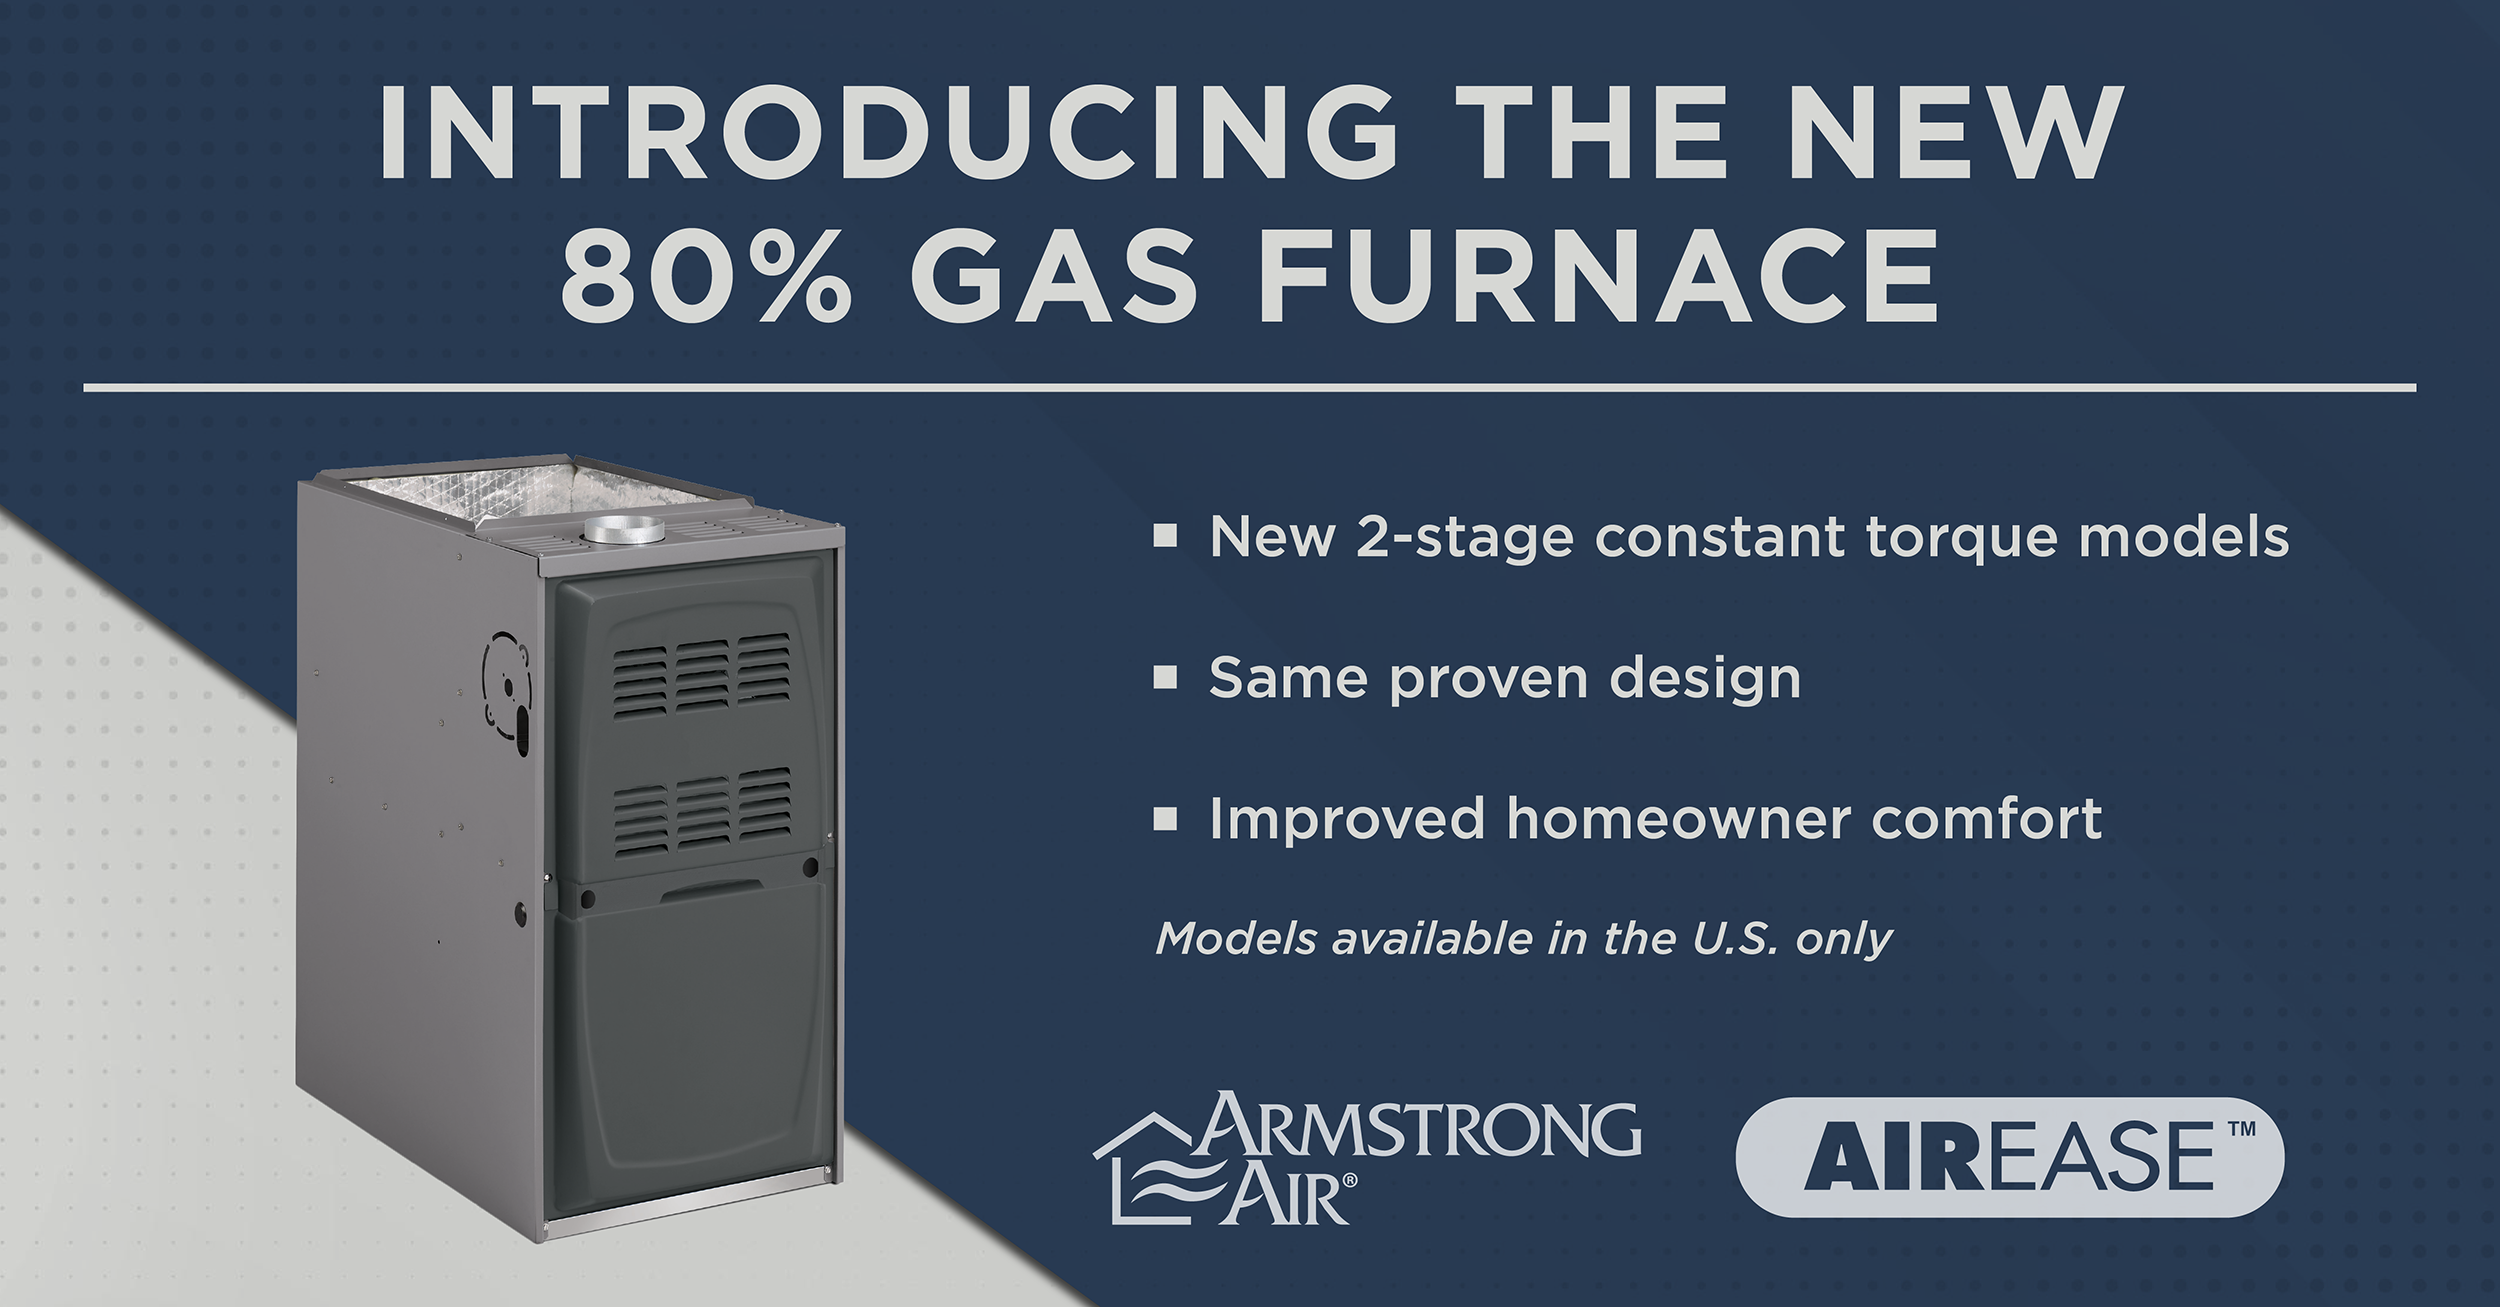  Armstrong Air® and AirEase™ Introduce the A802E Two-Stage Constant Torque Gas Furnace at Mid-Price Point with Enhanced Energy Savings 